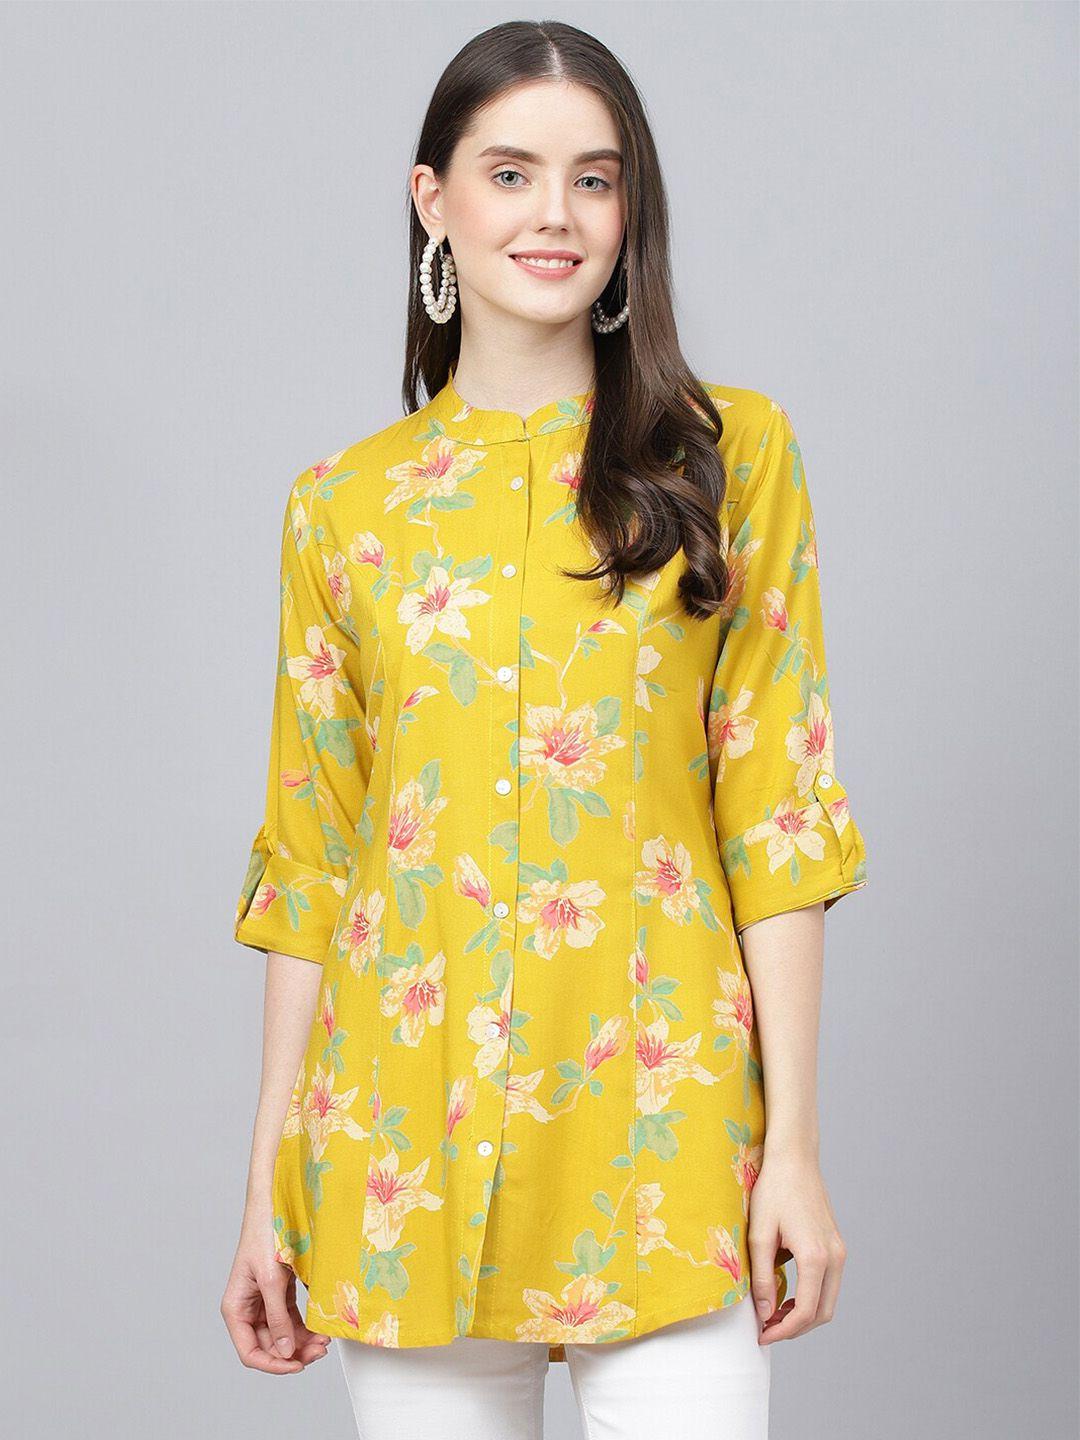 kalini-floral-printed-roll-up-sleeves-shirt-style-longline-top